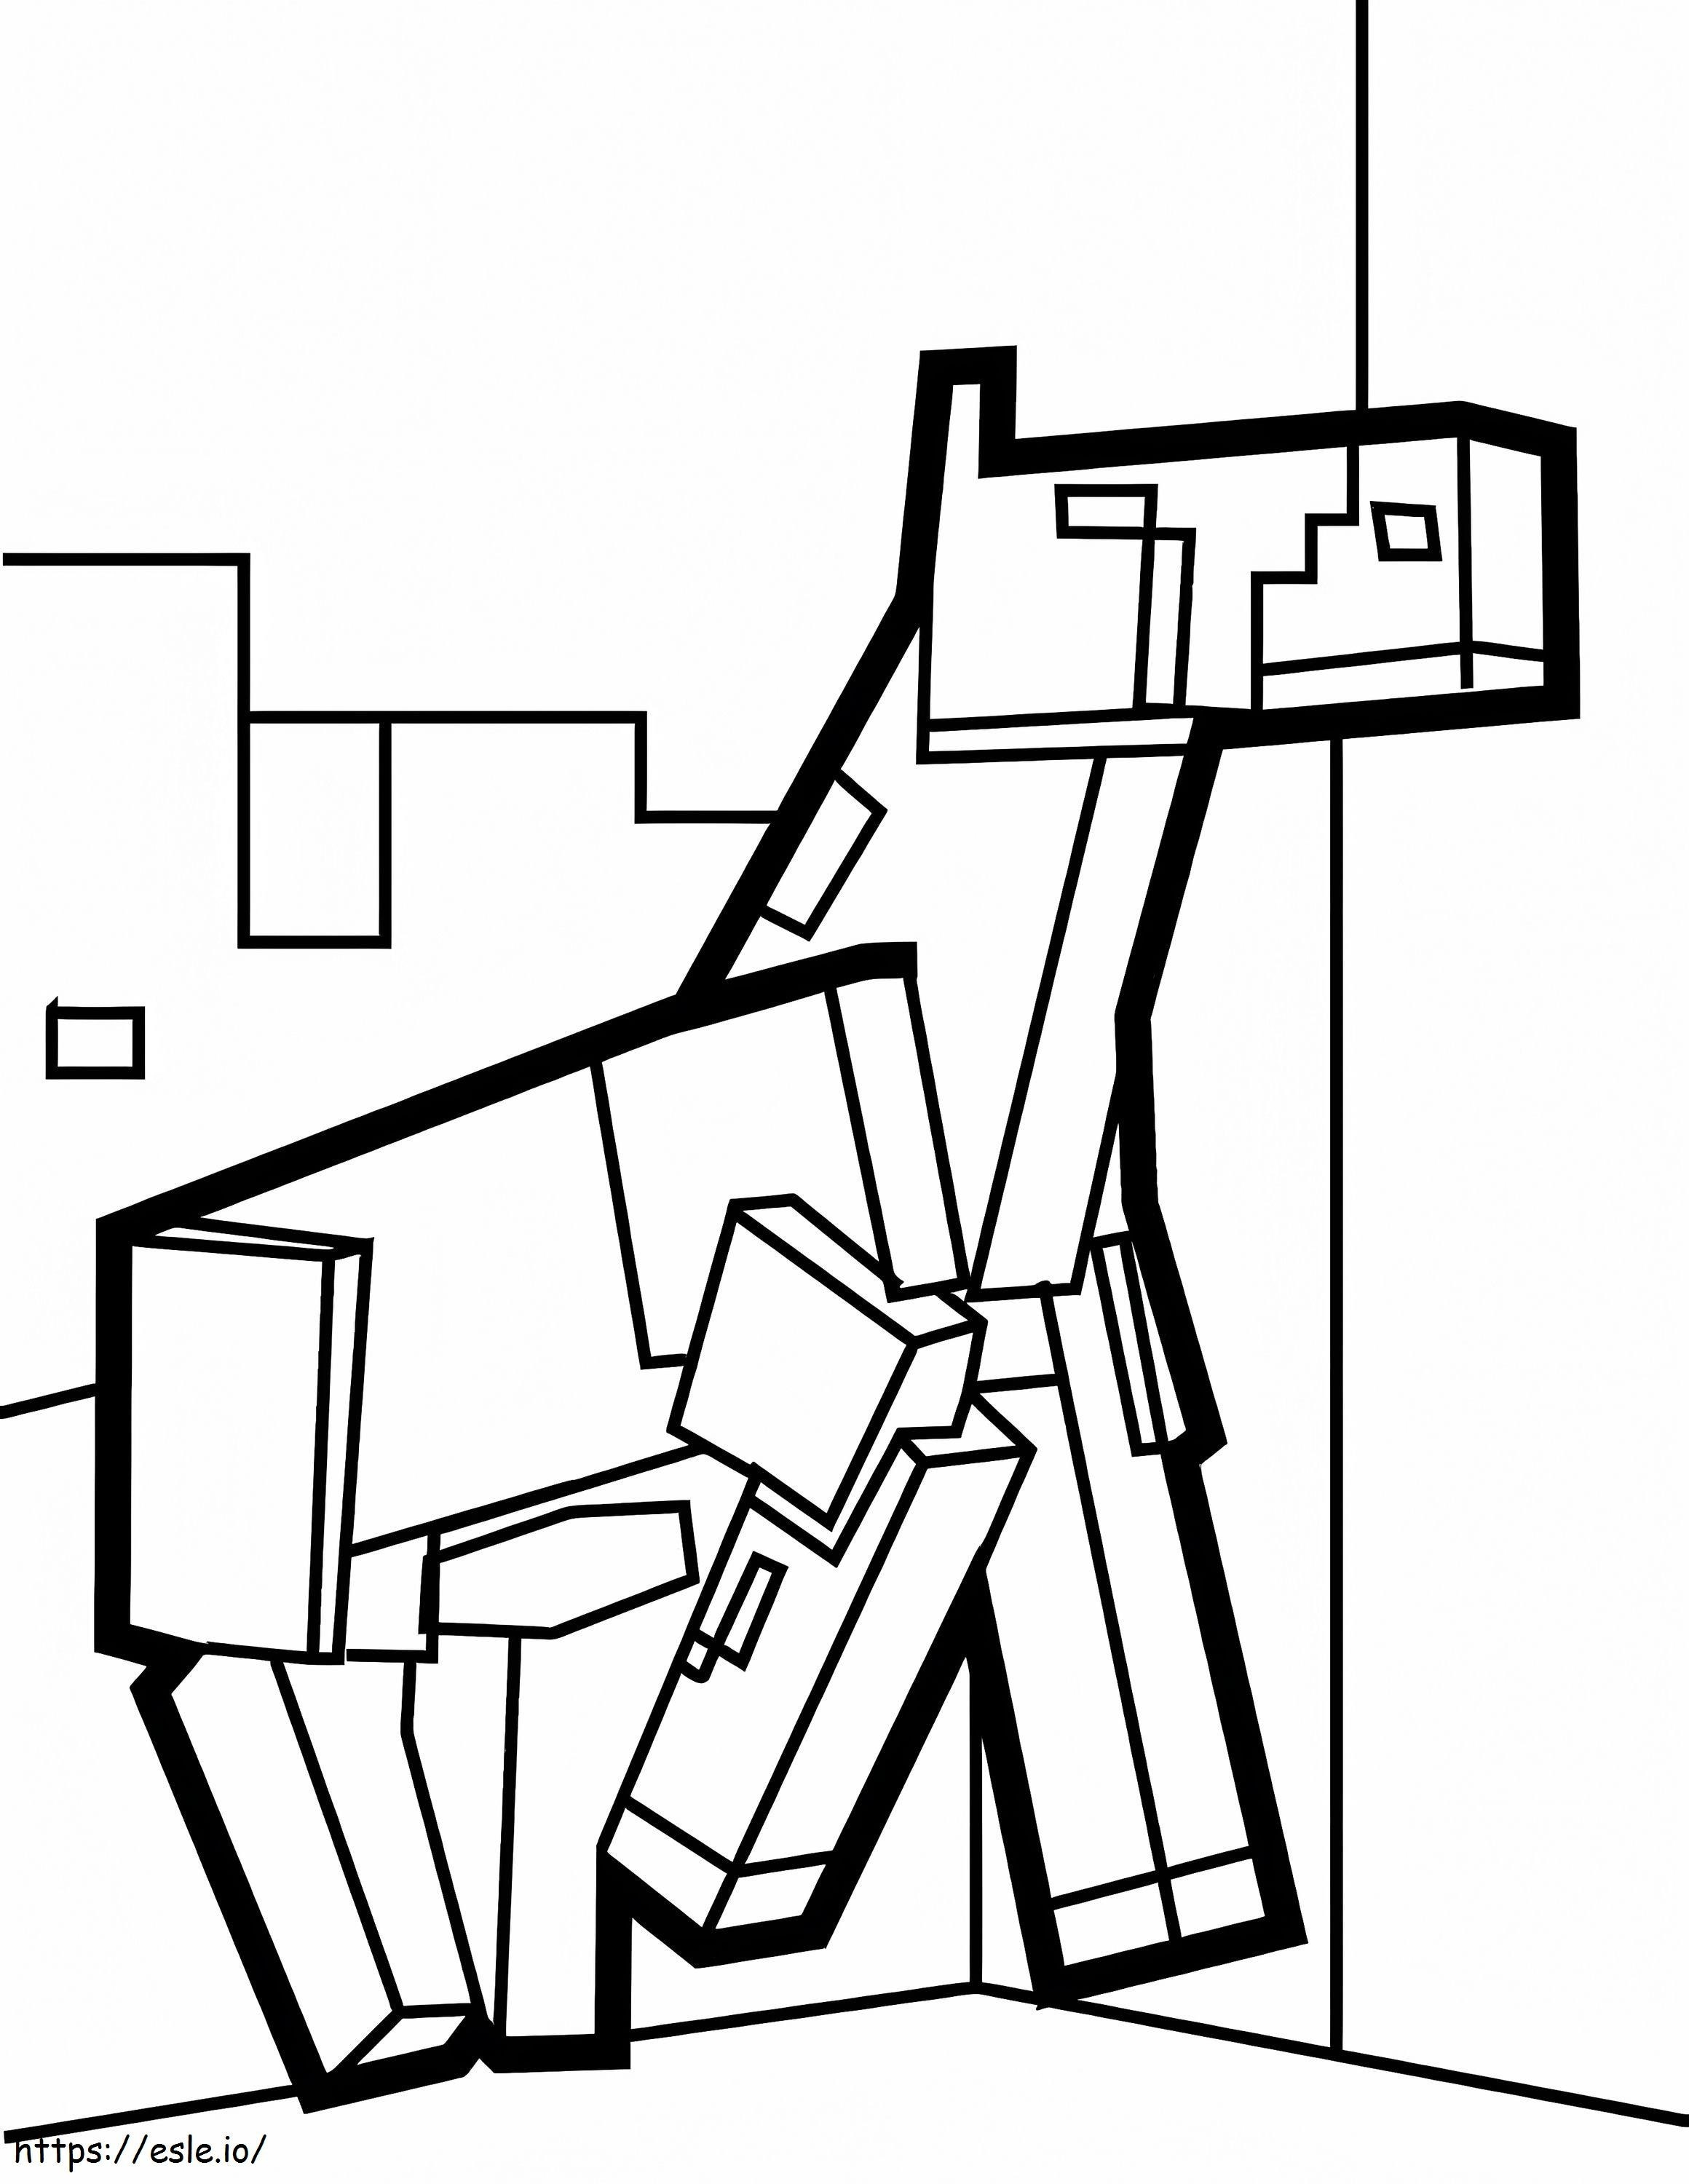 Minecraft Horse Walking coloring page